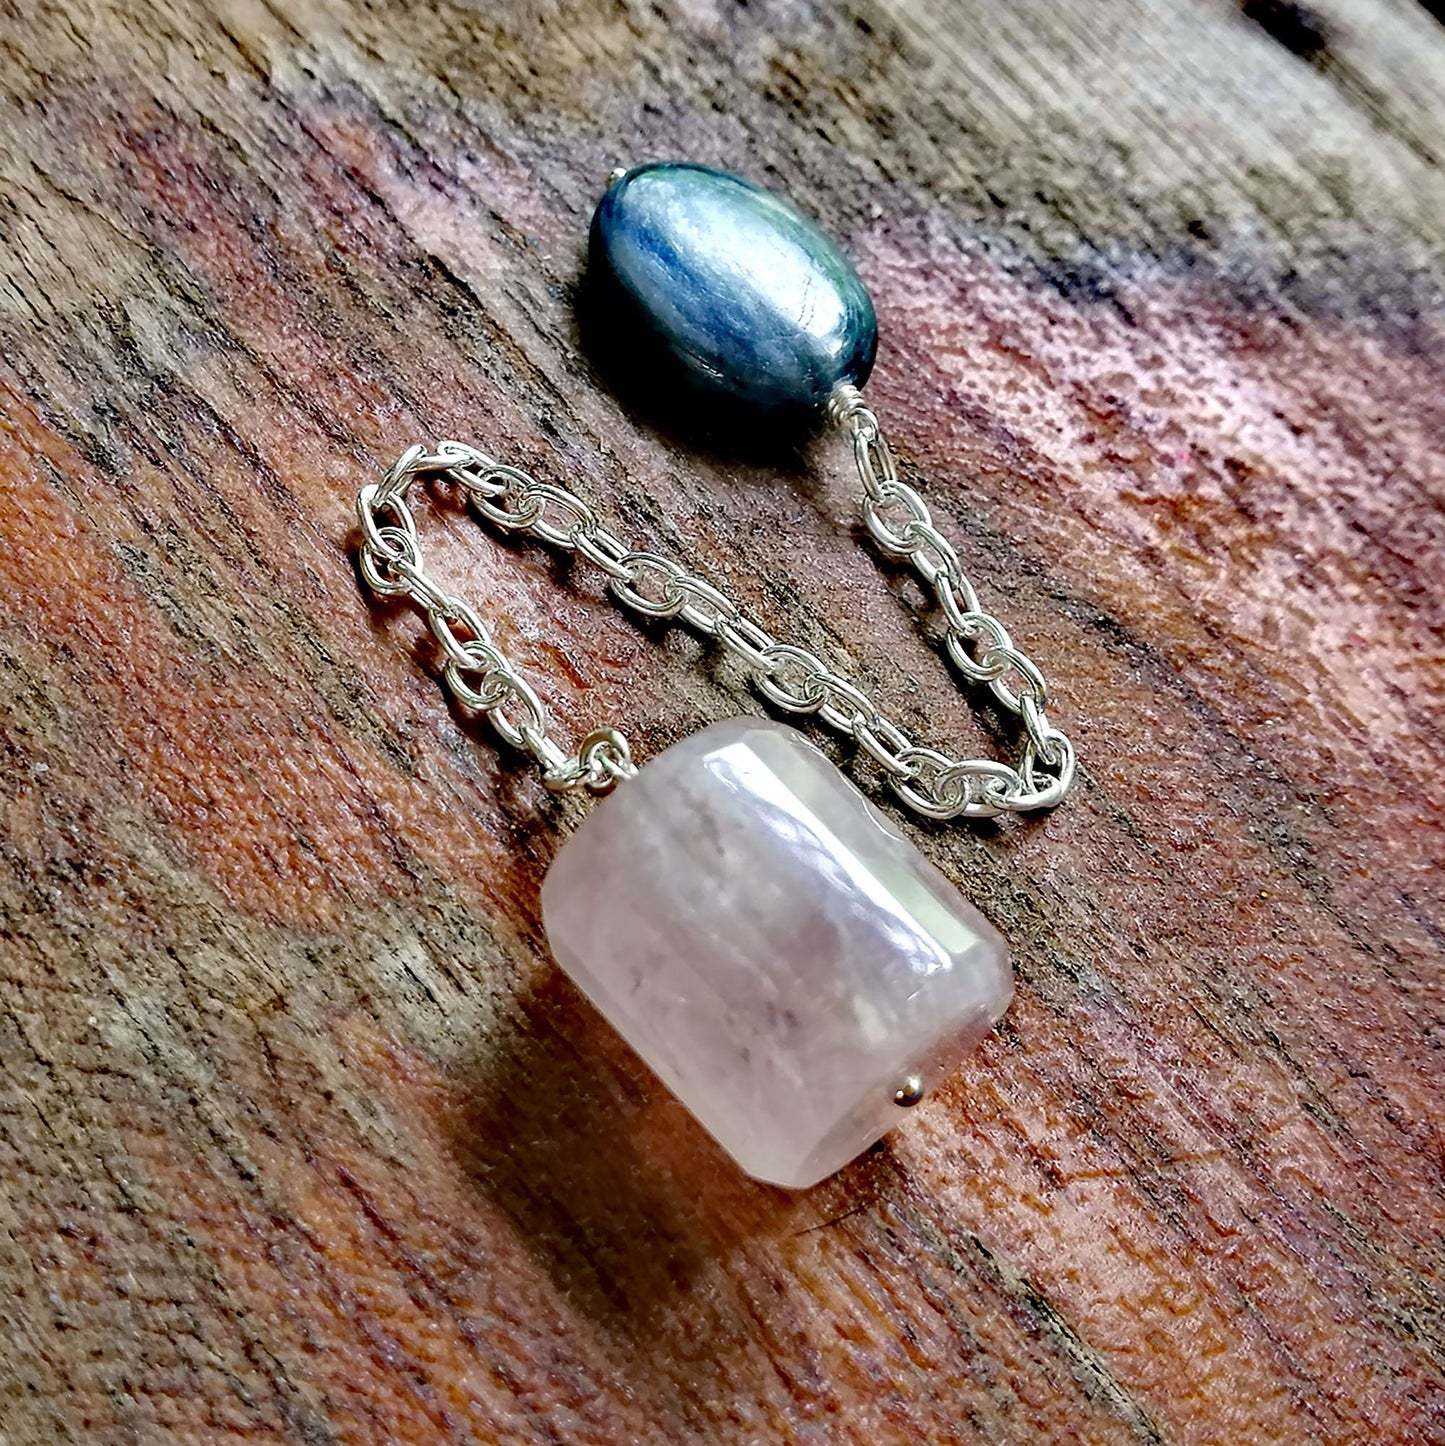 Rose Quartz and Blue Kyanite Pendulum on a Silver Chain - A Tool of Divination - Empower yourself!